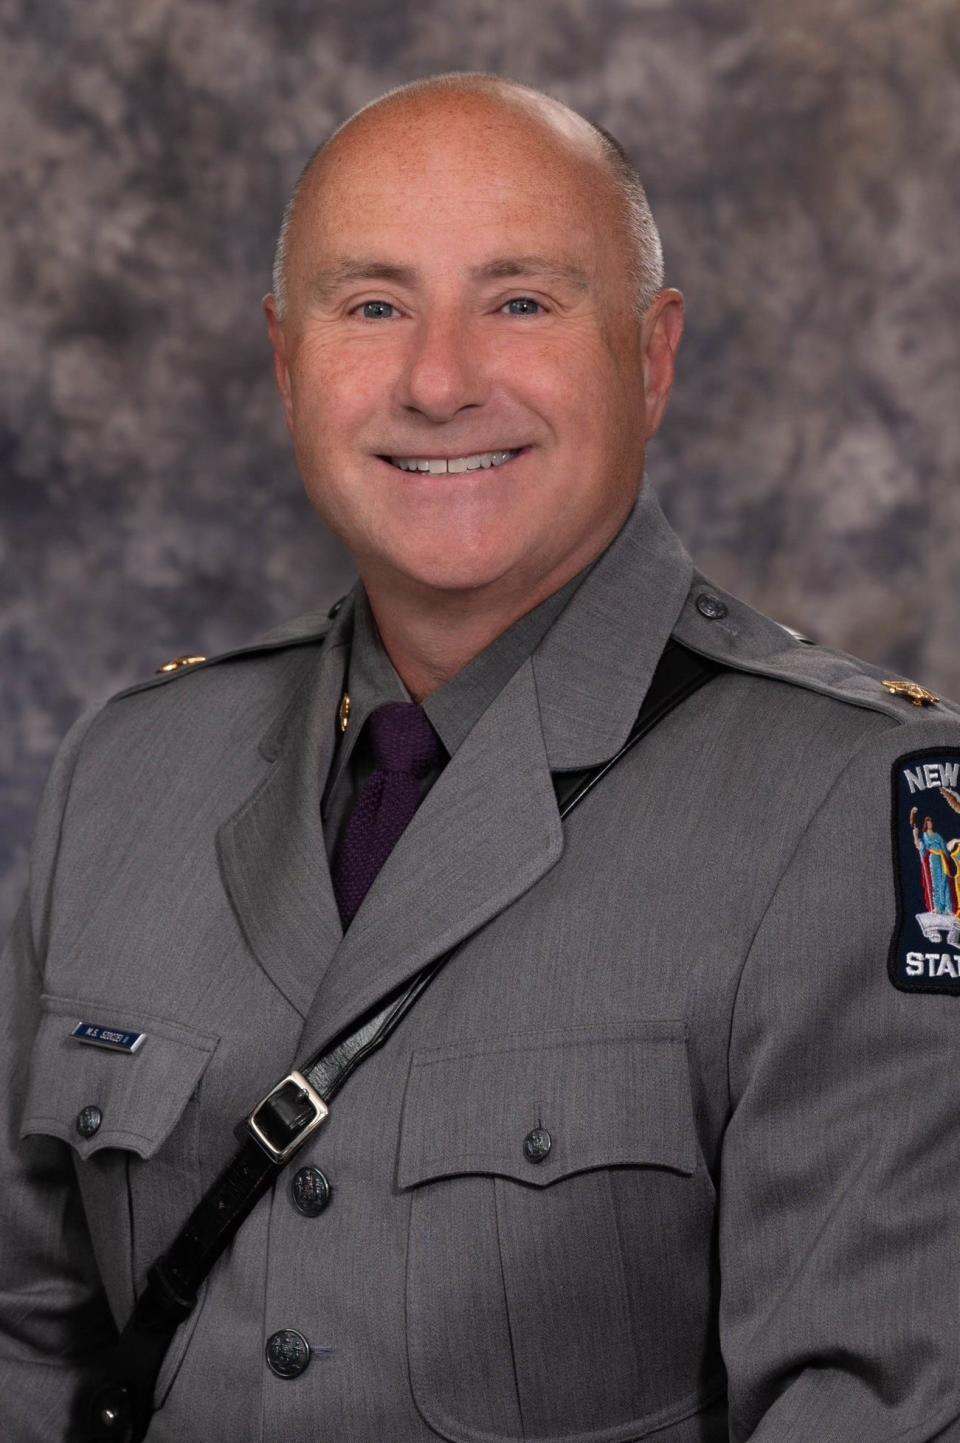 Major Miklos Szoczei, a Rochester area native, is the commander of New York State Police Troop E.